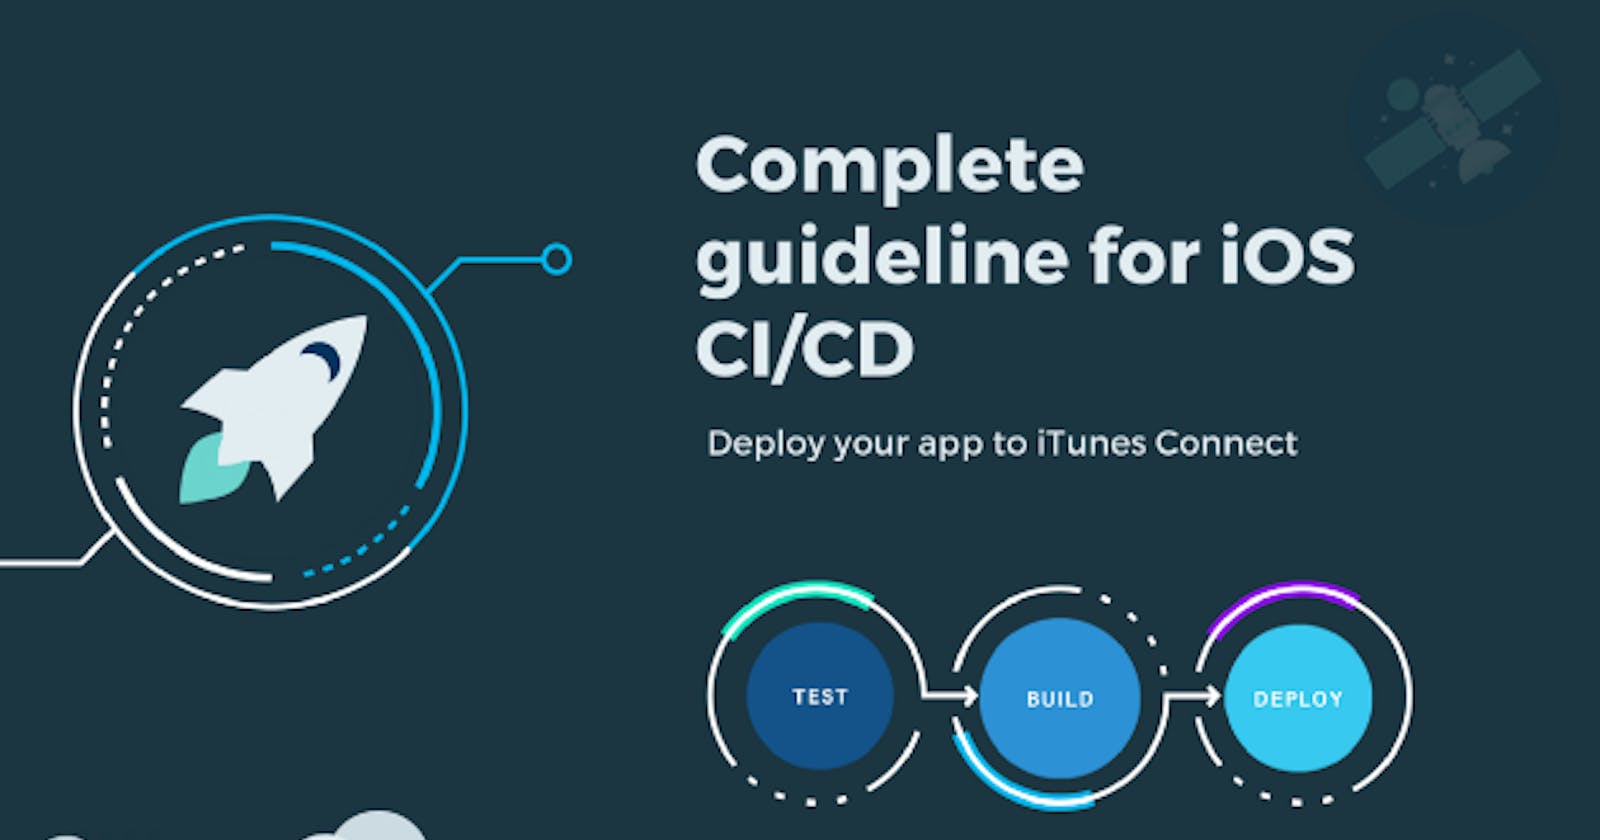 A complete guide on how to build, test, and automate iOS app deployment.